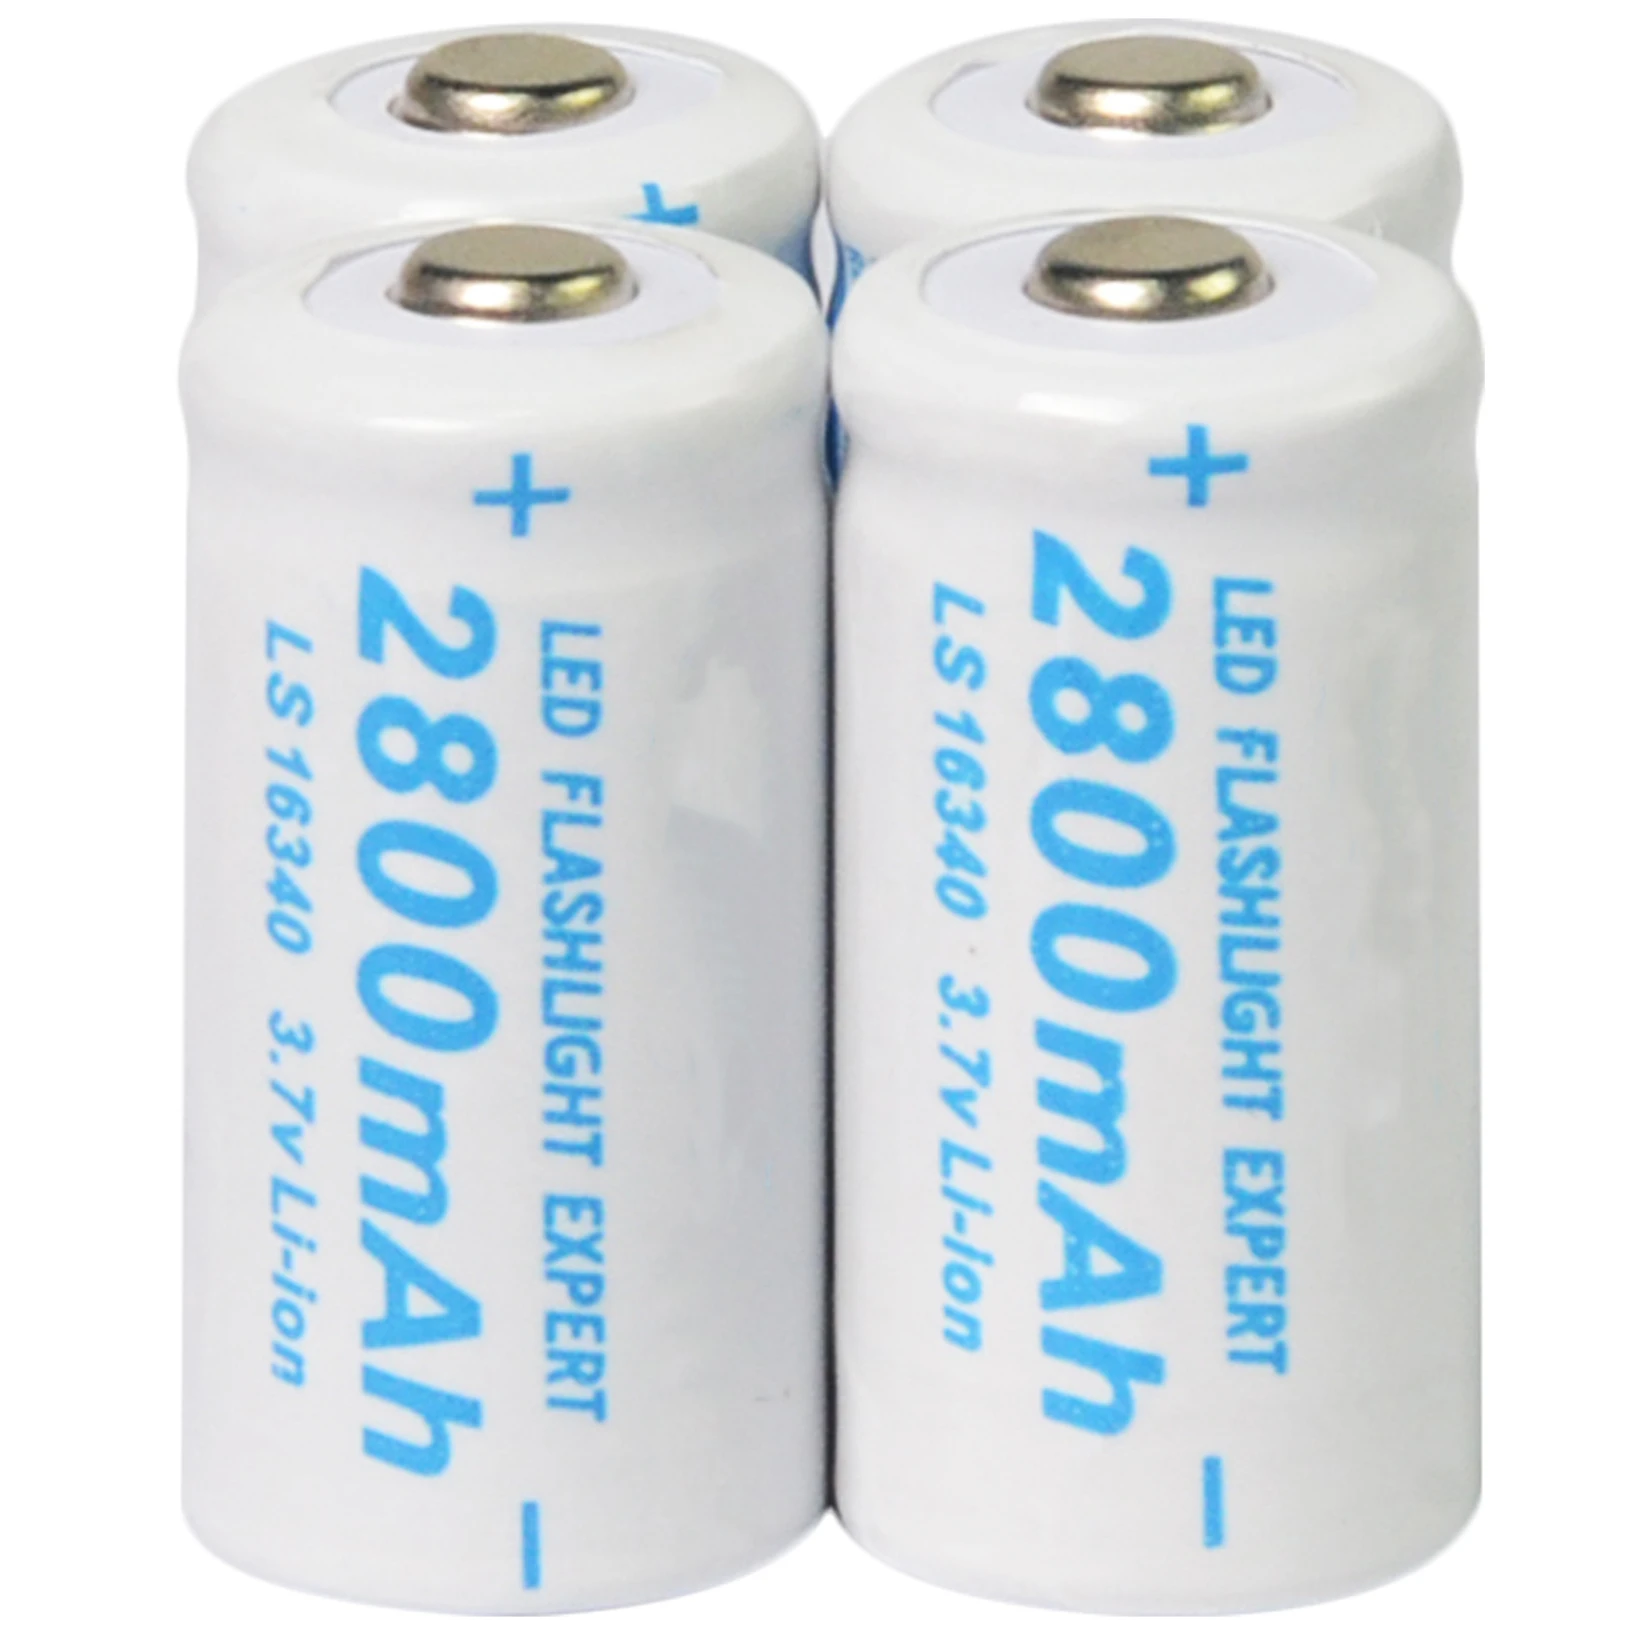 4x 3.7V CR123A 123A CR123 16340 2800mAh Rechargeable Battery Cell White  COLOR|Rechargeable Batteries| - AliExpress